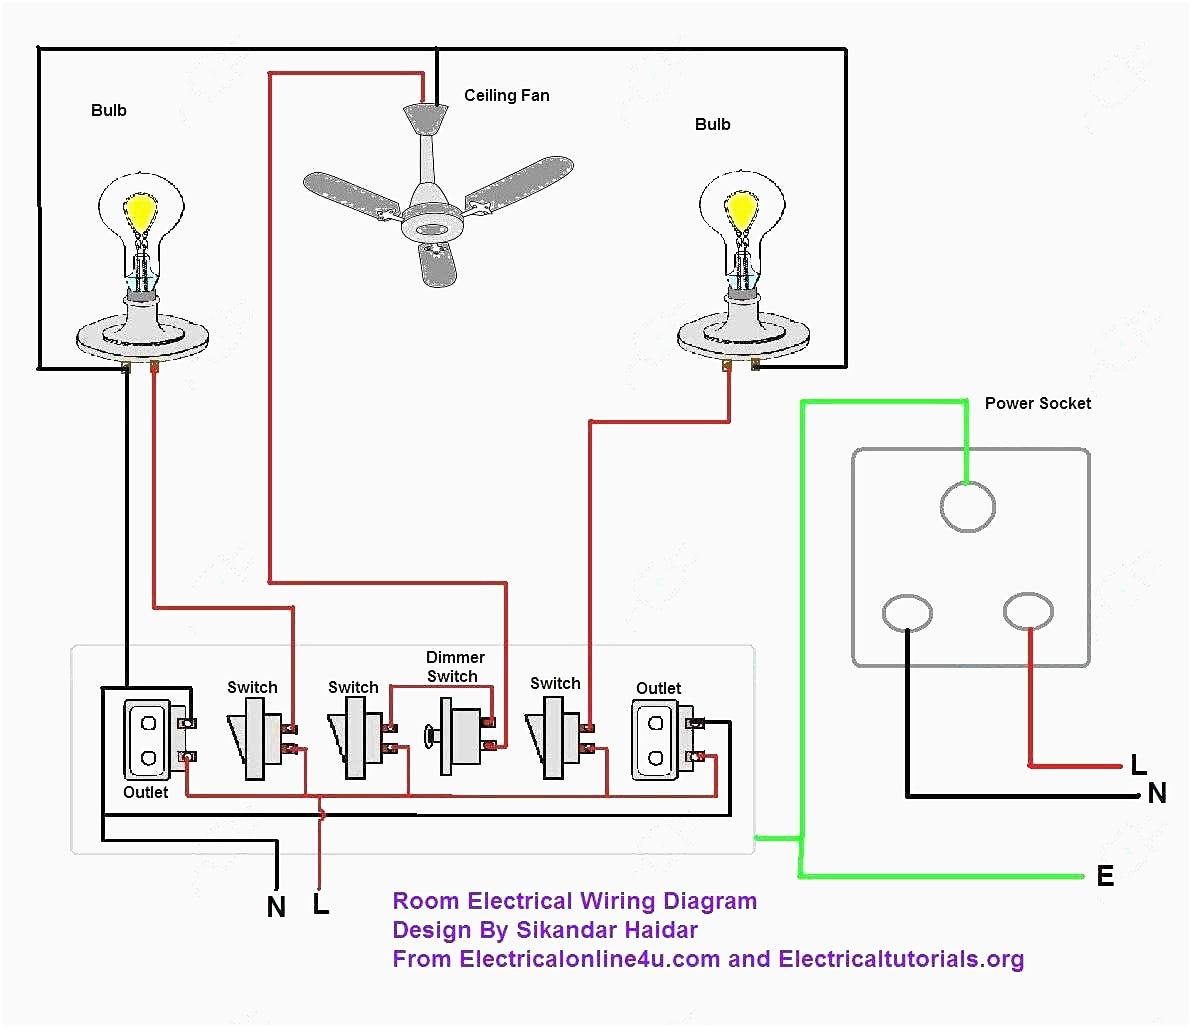 Hvac System Diagram Wire Home Hvac Systems Diagrams Wiring Diagram Information